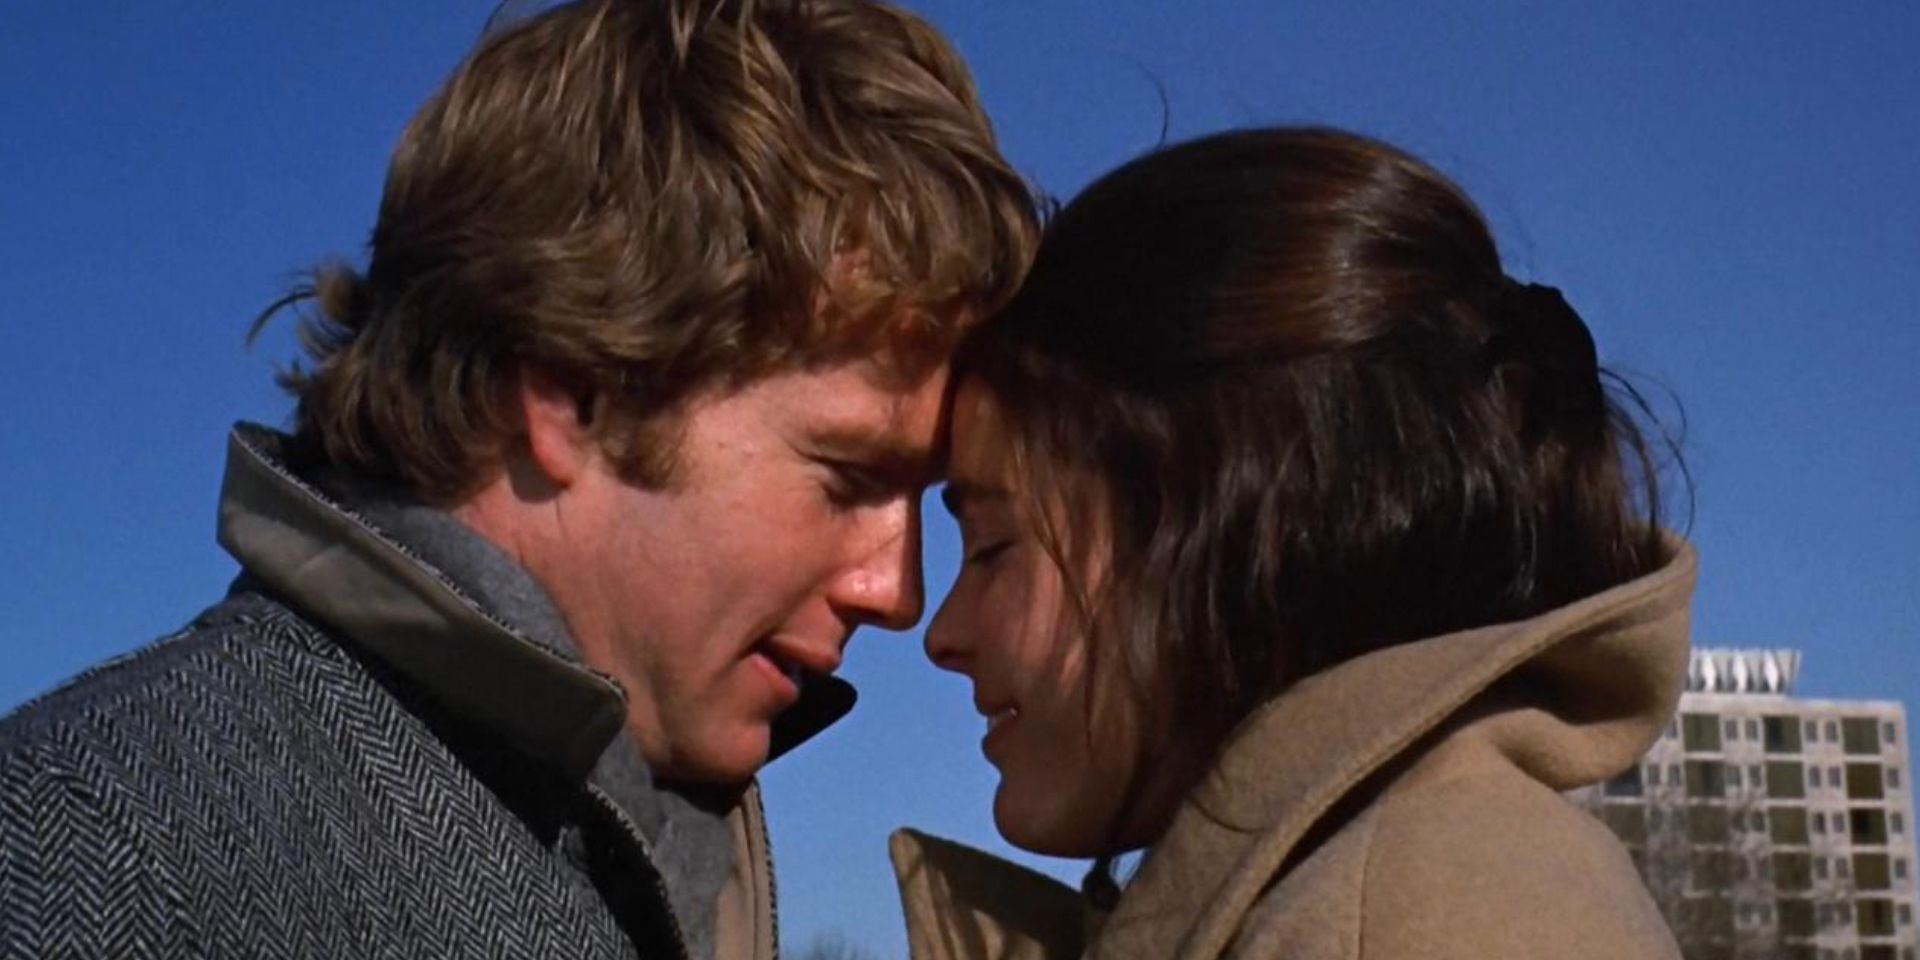 Ryan ONeal and Ally McGraw wearing coats and smiling with their foreheads pressed together in the 1970 movie Love Story